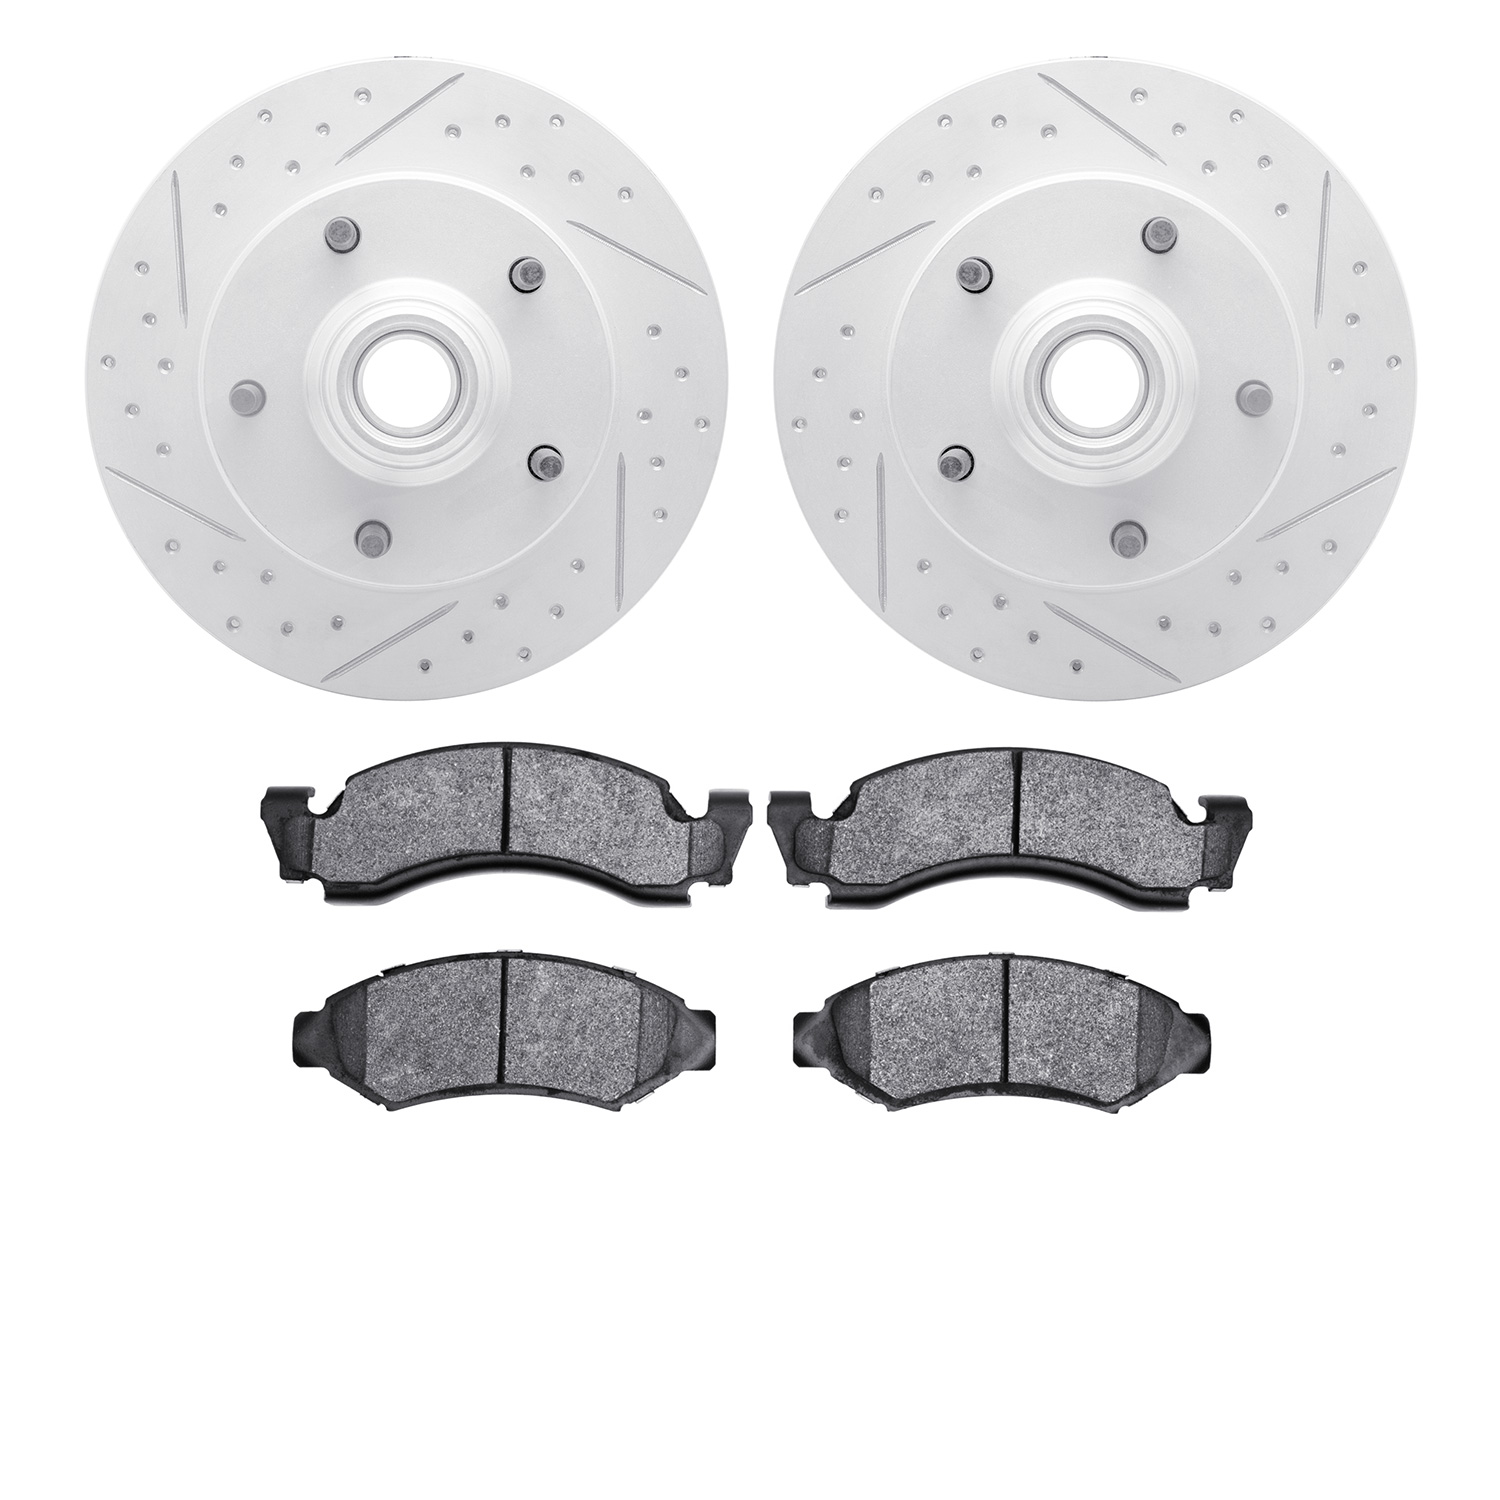 Geoperformance Drilled/Slotted Brake Rotors with Ultimate-Duty